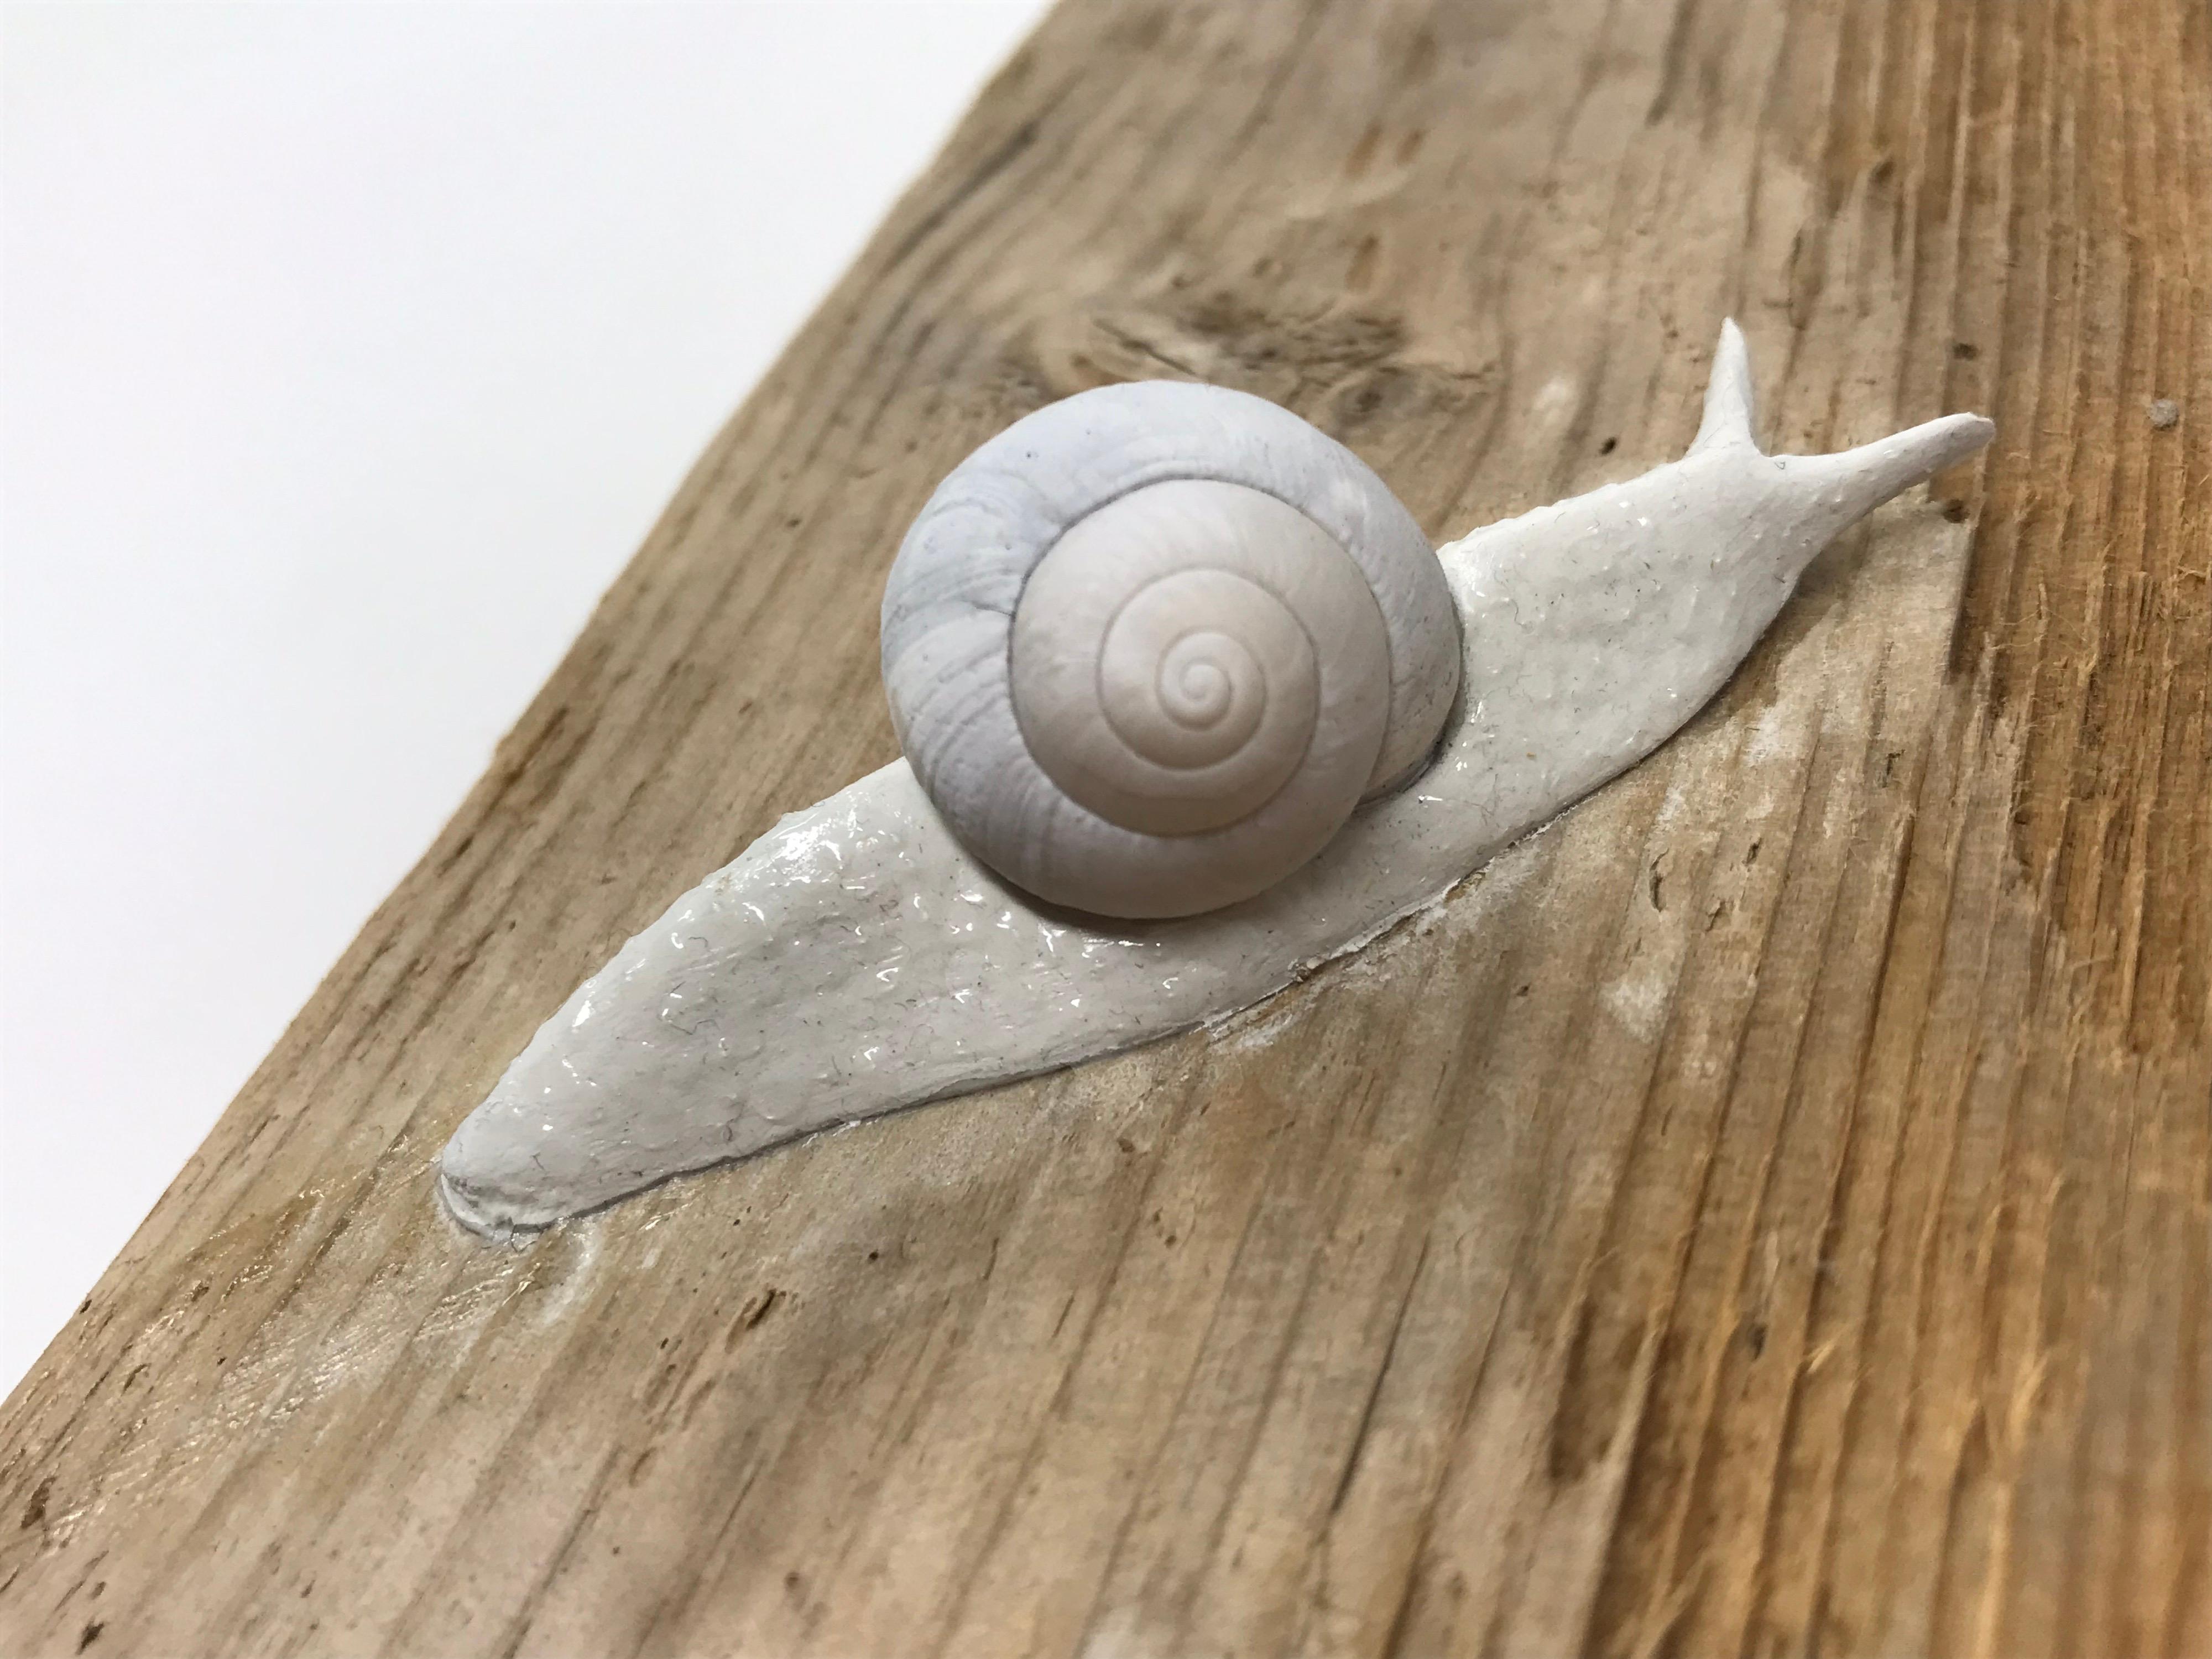 Snails On a Weathered Board “Traversing Weathered Wood” by Bethany Krull For Sale 1